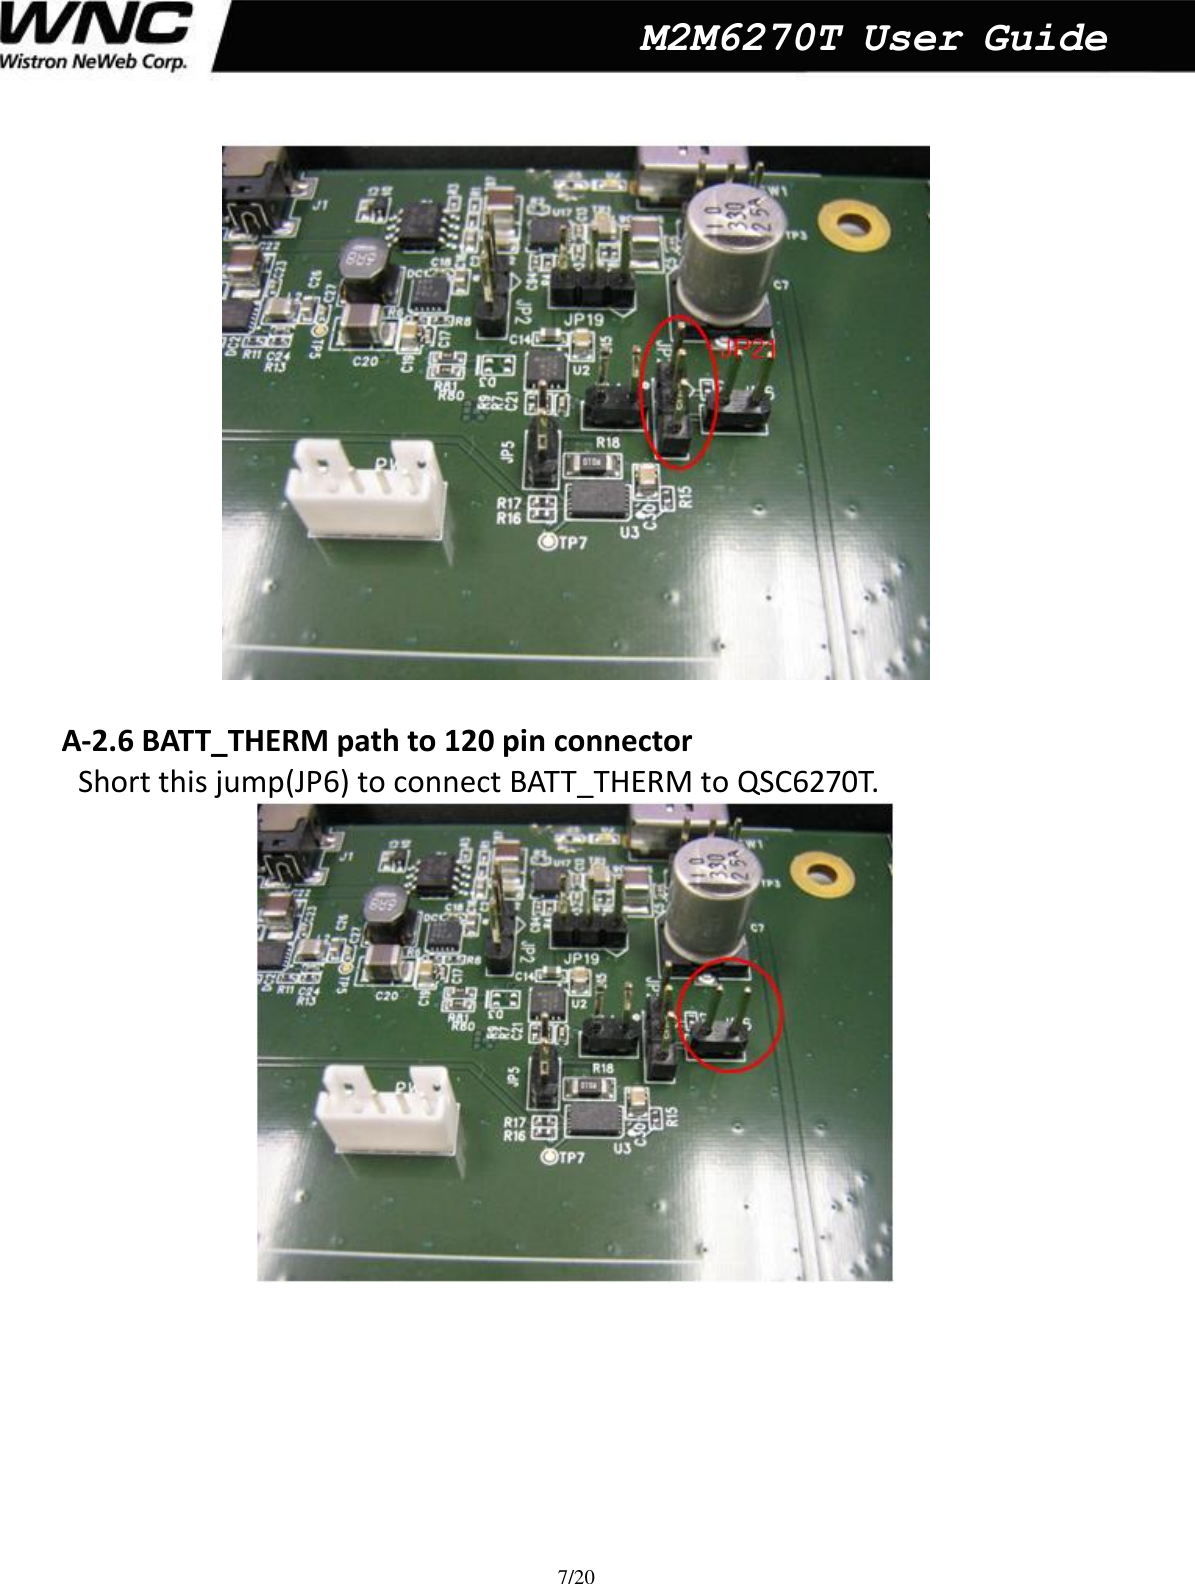  7/20  M2M6270T User Guide   A-2.6 BATT_THERM path to 120 pin connector   Short this jump(JP6) to connect BATT_THERM to QSC6270T.        